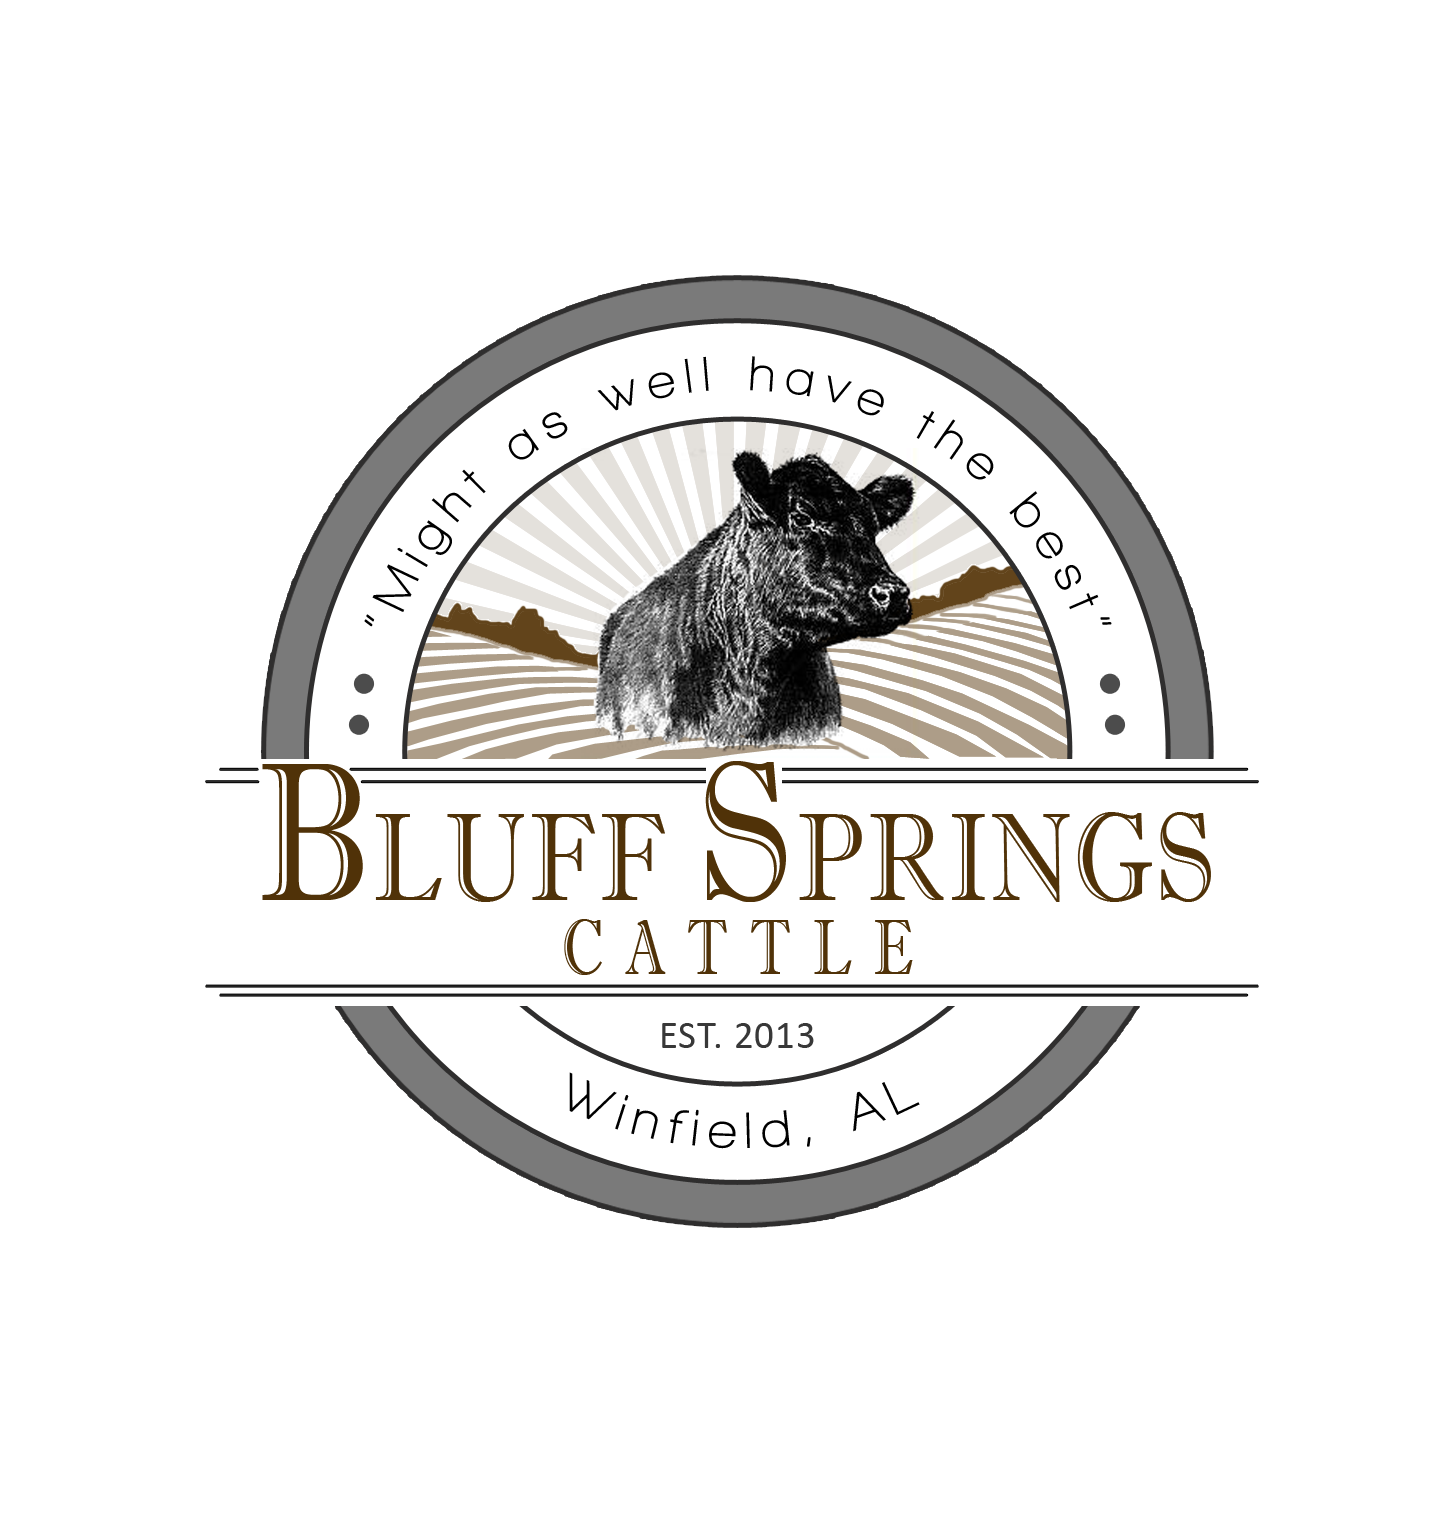 Bluff Springs Cattle